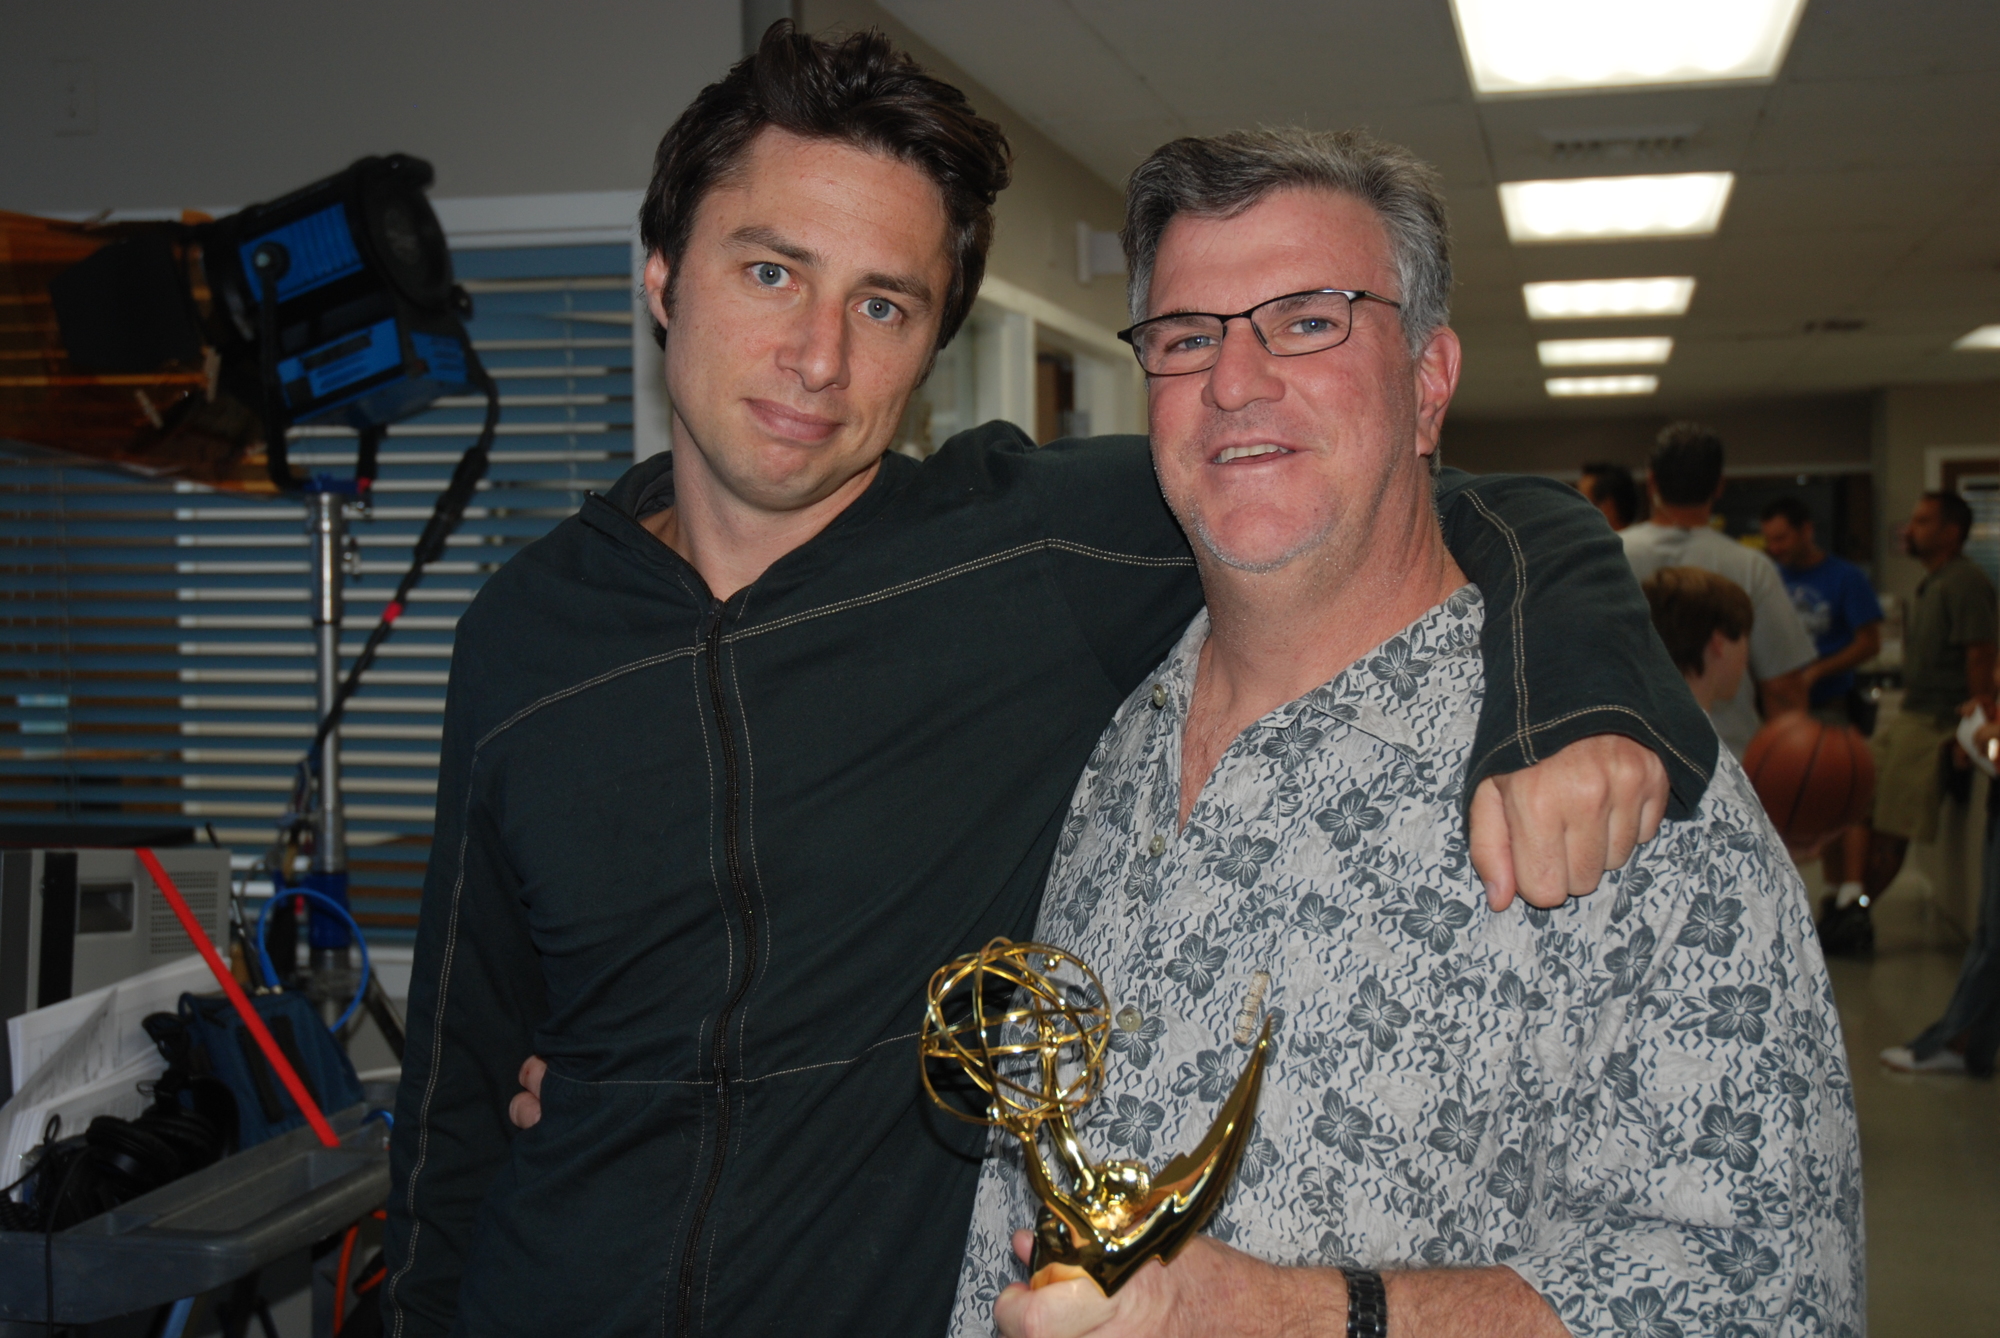 Sound mixer Joe Foglia worked with Zach Braff — who starred in the TV show “Scrubs” — for nine years.